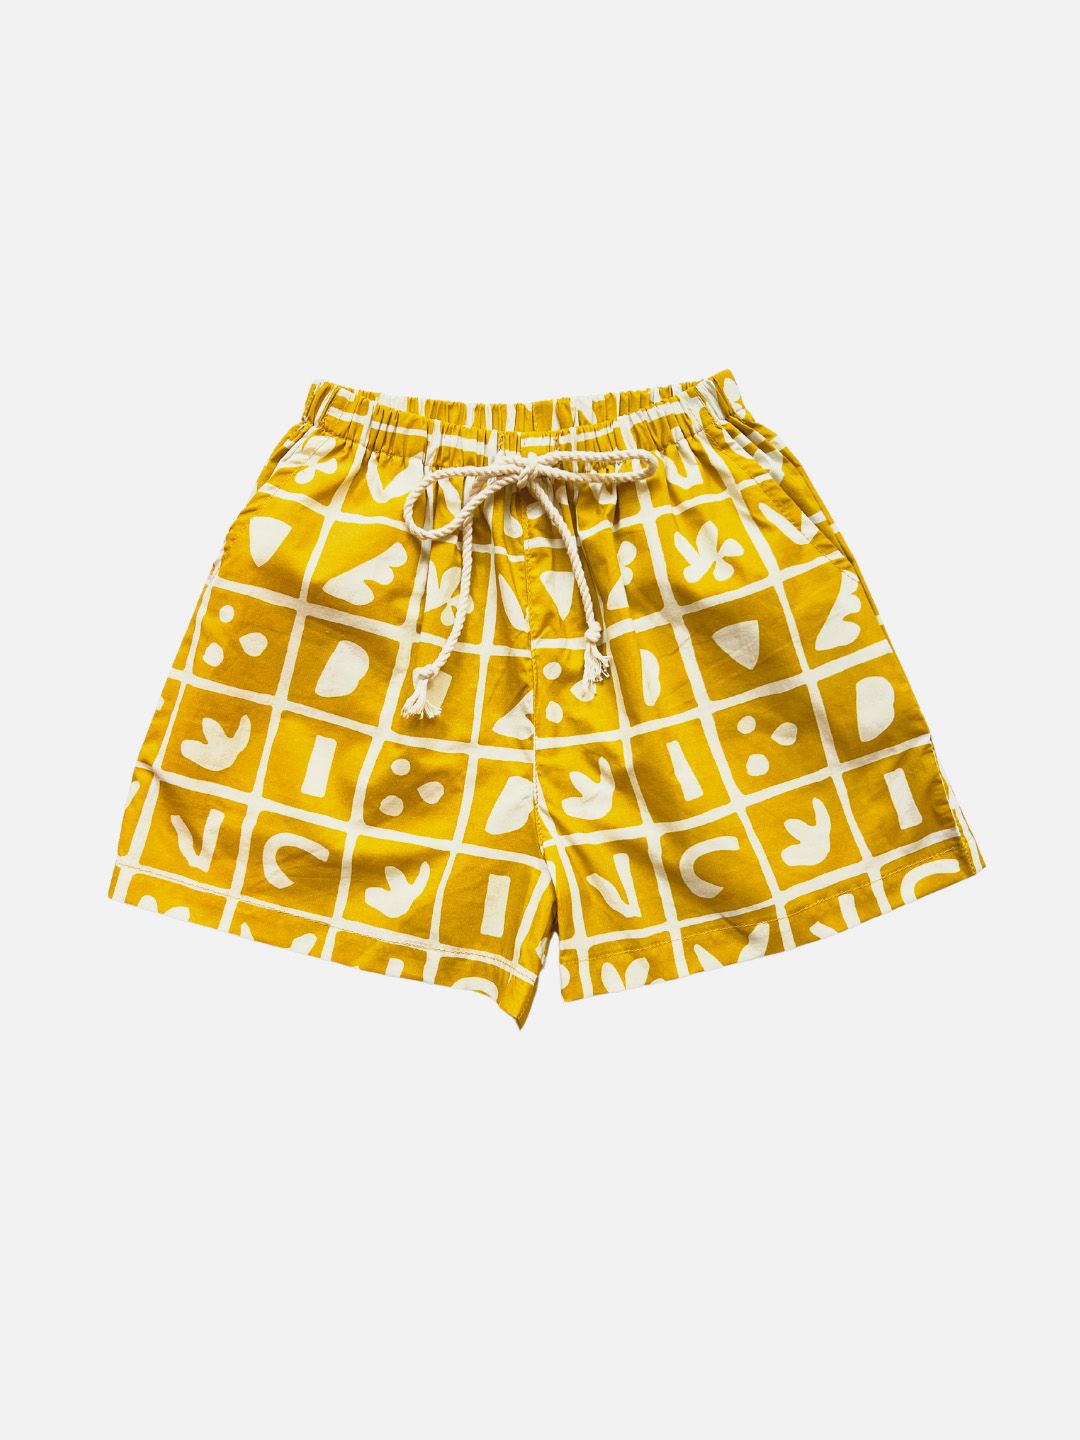 A pair of kids' shorts in mustard yellow overlaid with a grid of different shapes in white